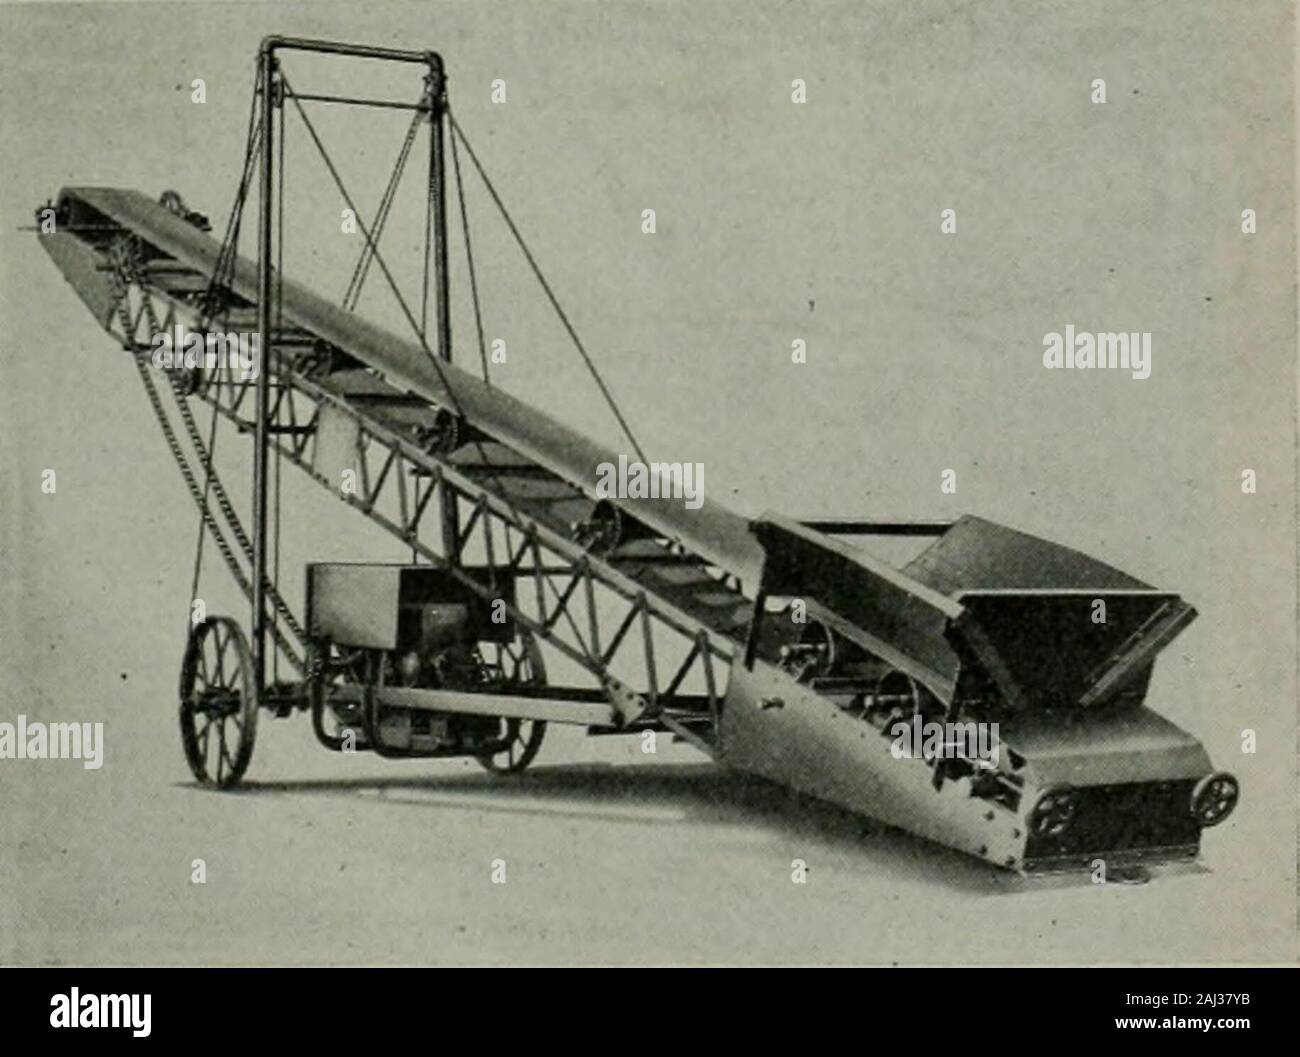 Public works . ctly into wagons or trucks. It hasan endless 18-inch belt with a hopperattached to the lower end, that is sus-pended from a gallows frame mountedon wheels. The belt conveyor is drivenby a sprocket chain operated by a 3 or5-horse power gasoline engine under theconveyor. The conveyor frame, 32 feet long and26 inches wide, is adjustable through anangle of 30 degrees by a worm gear orcrank. Its capacity for gravel or brokenstone is 50 yards per hour and it weighs3,100 pounds. NATIONAL, ROAD OILER The National Road Oiler, manufac-tured by the National Steel ProductsCo., is designed t Stock Photo